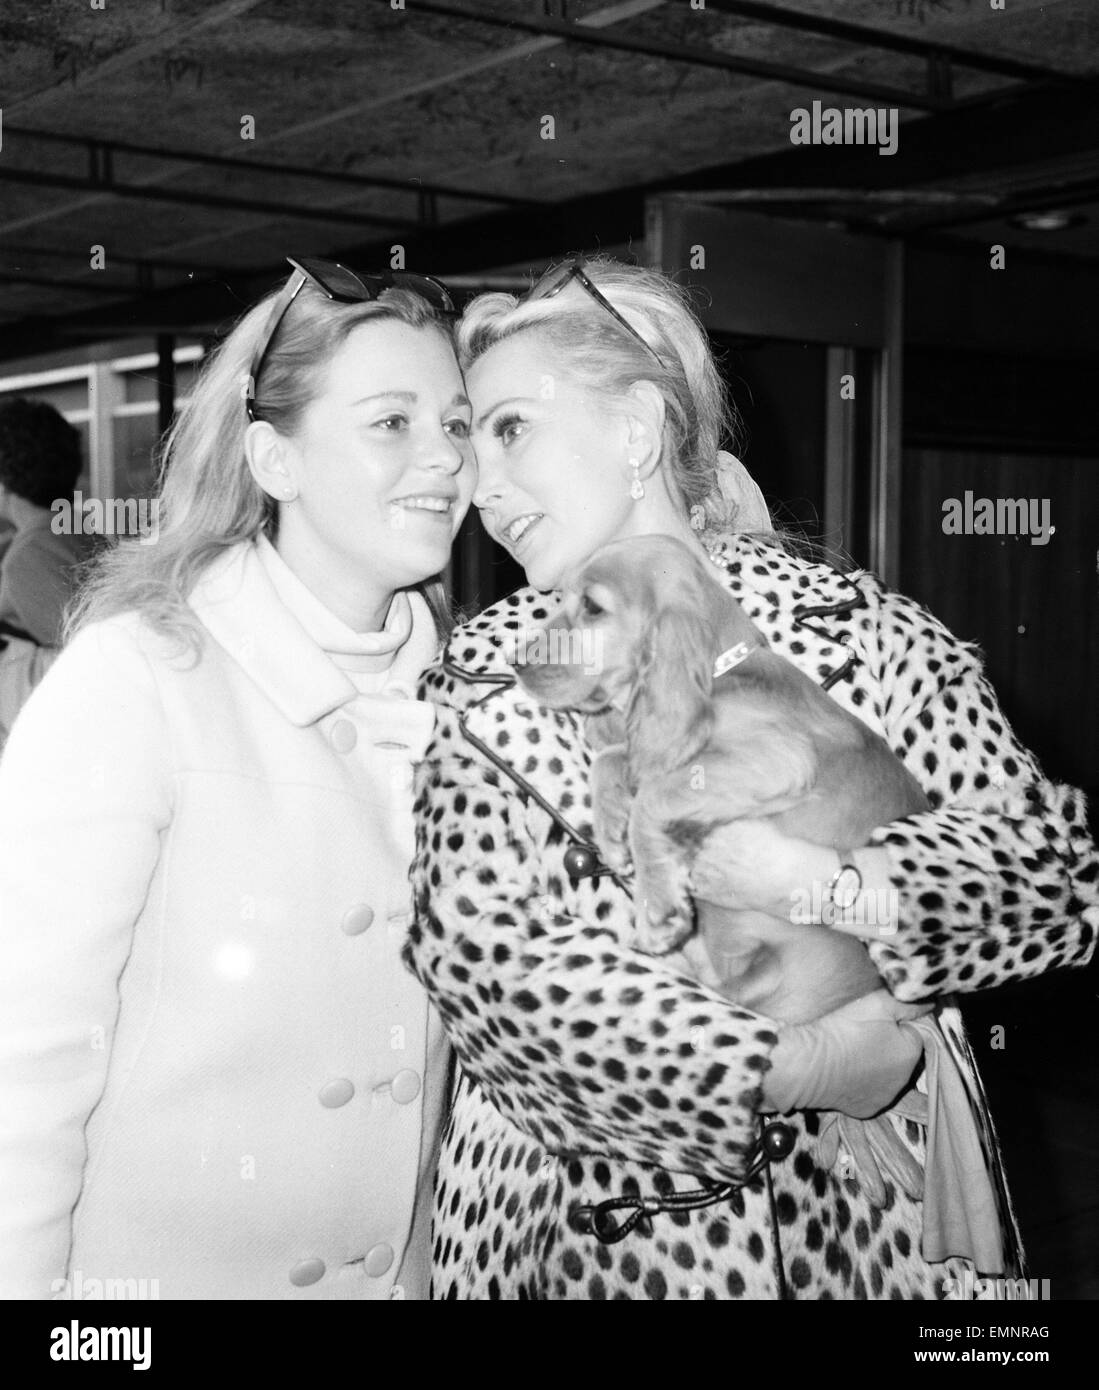 Actress Zsa Zsa Gabor arrives at London Heathrow Airport from New York Friday 20th September 1968. She was met by her daughter Constance Hilton a.k.a. Francesca Hilton & with a golden spaniel puppy named 'Paul McCartney'. Stock Photo